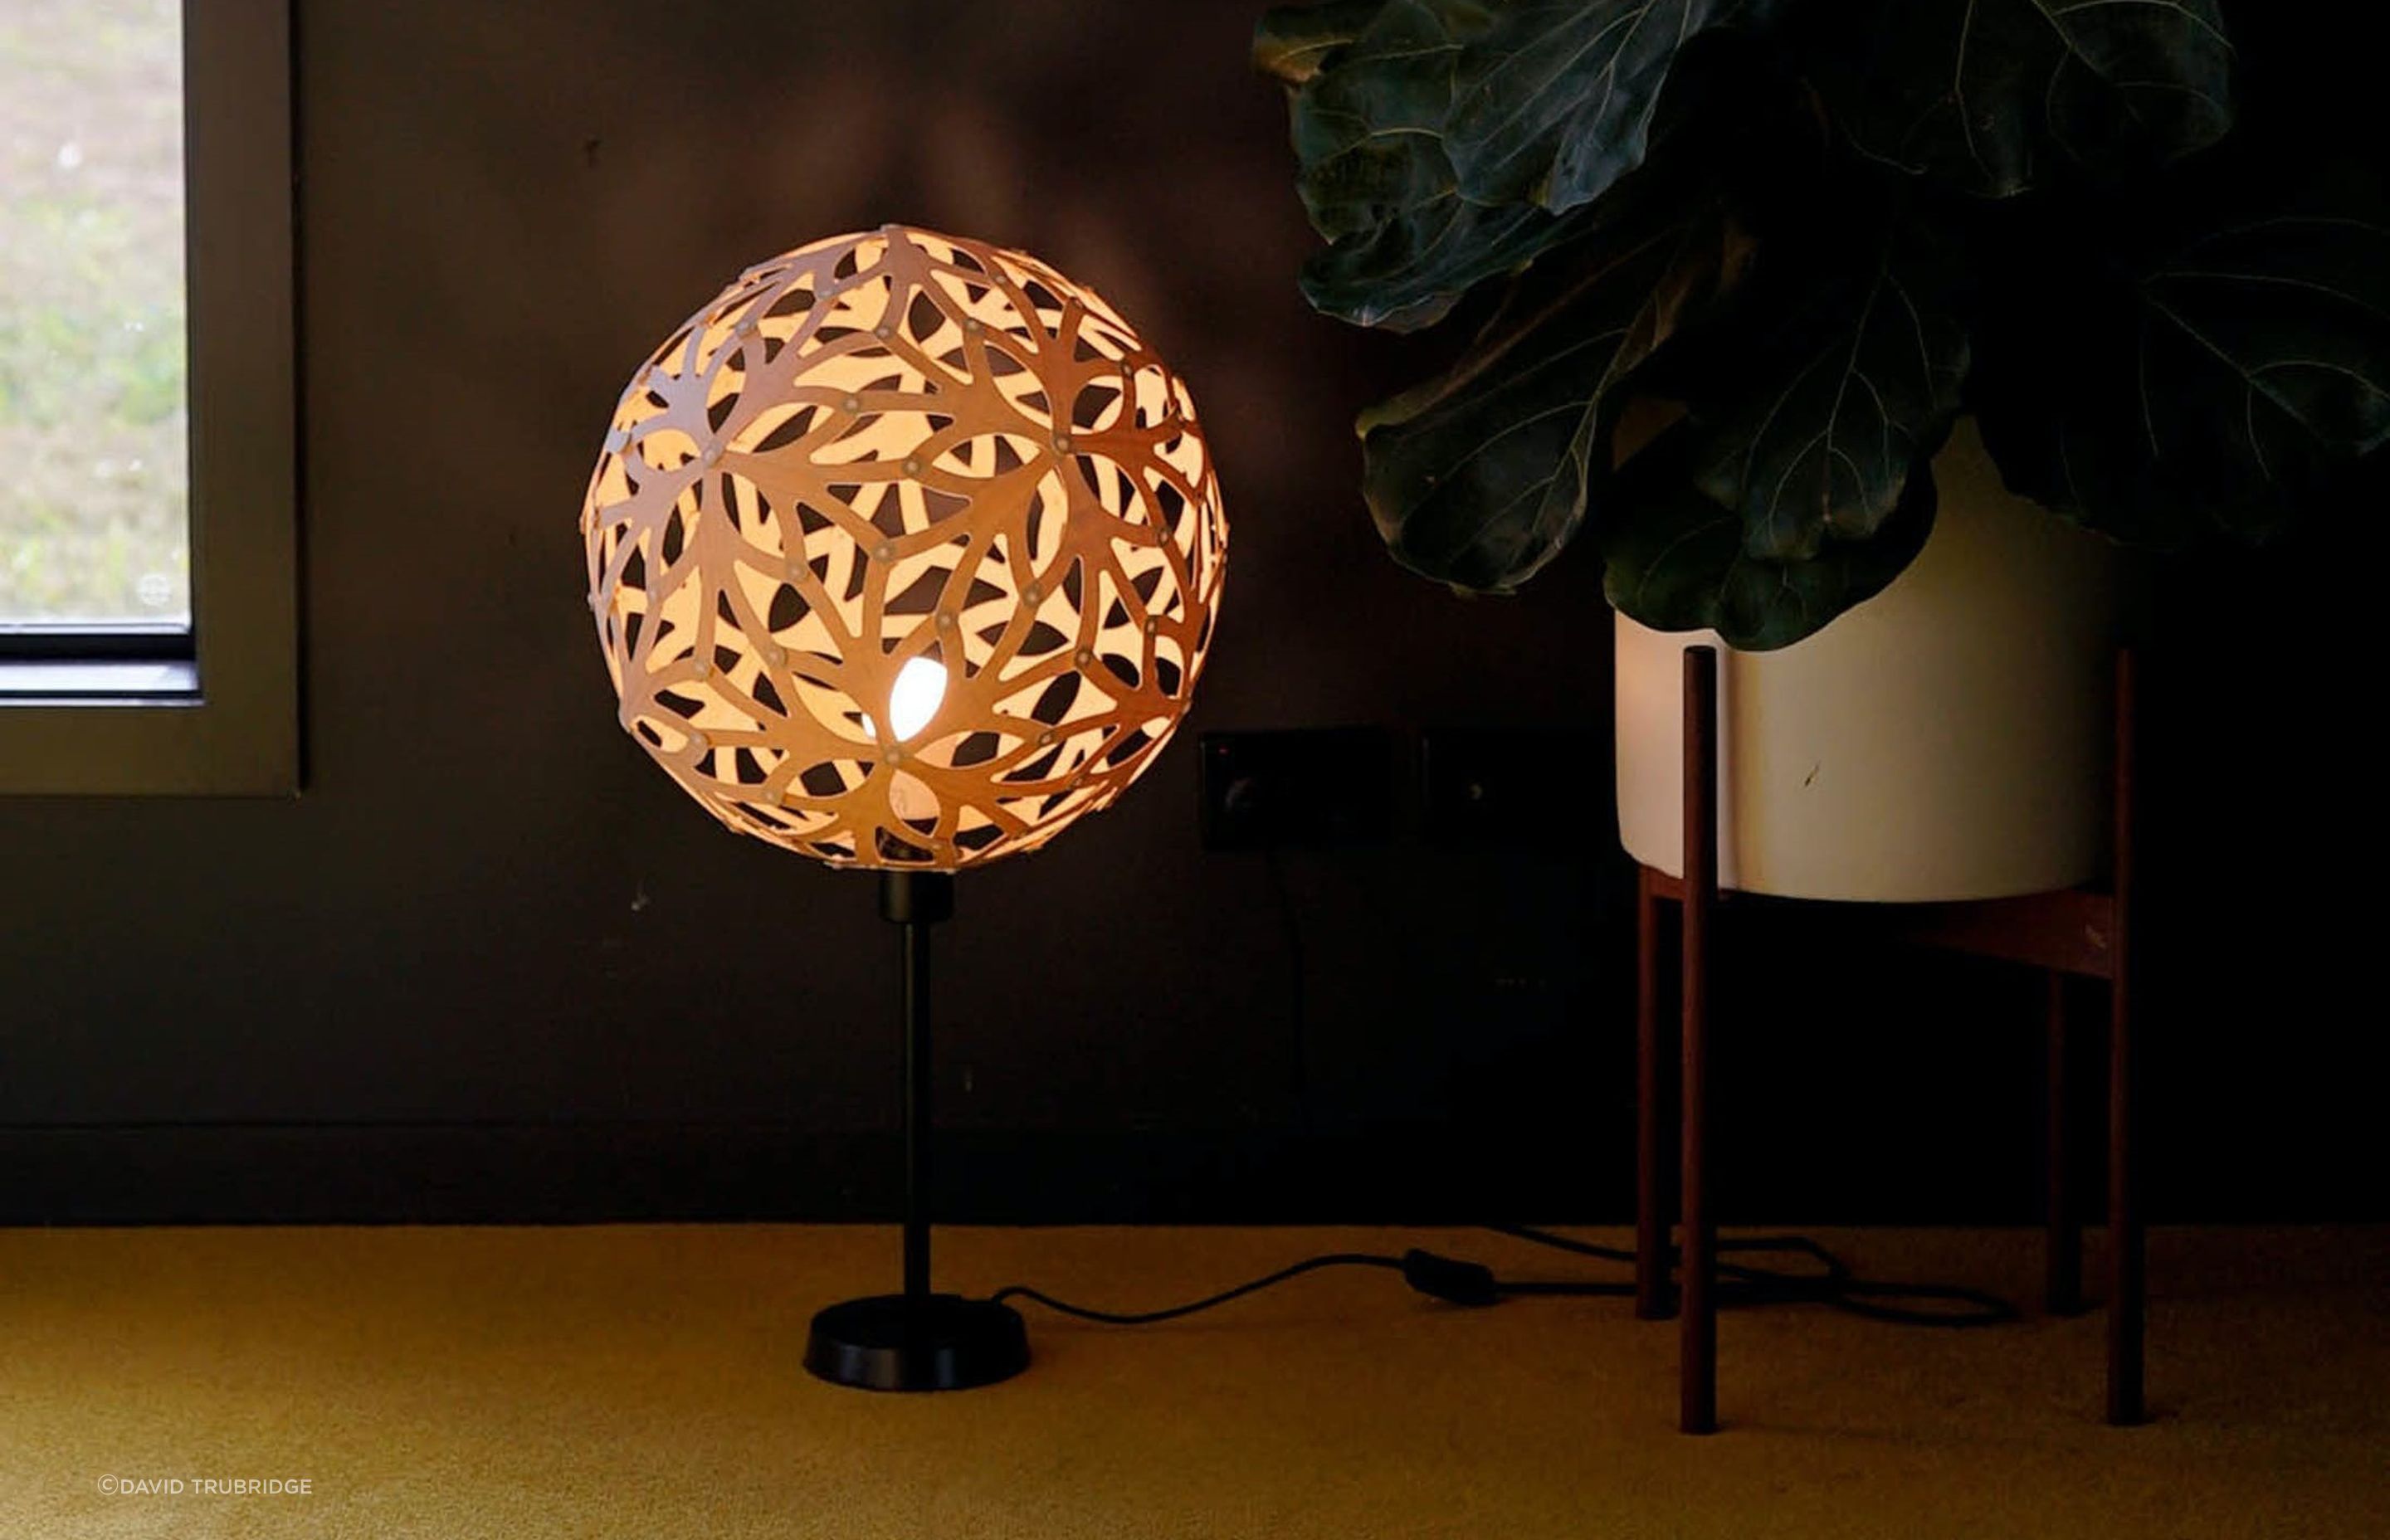 The David Trubridge Table Lamp is a great example of a versatile and unique lighting fixture